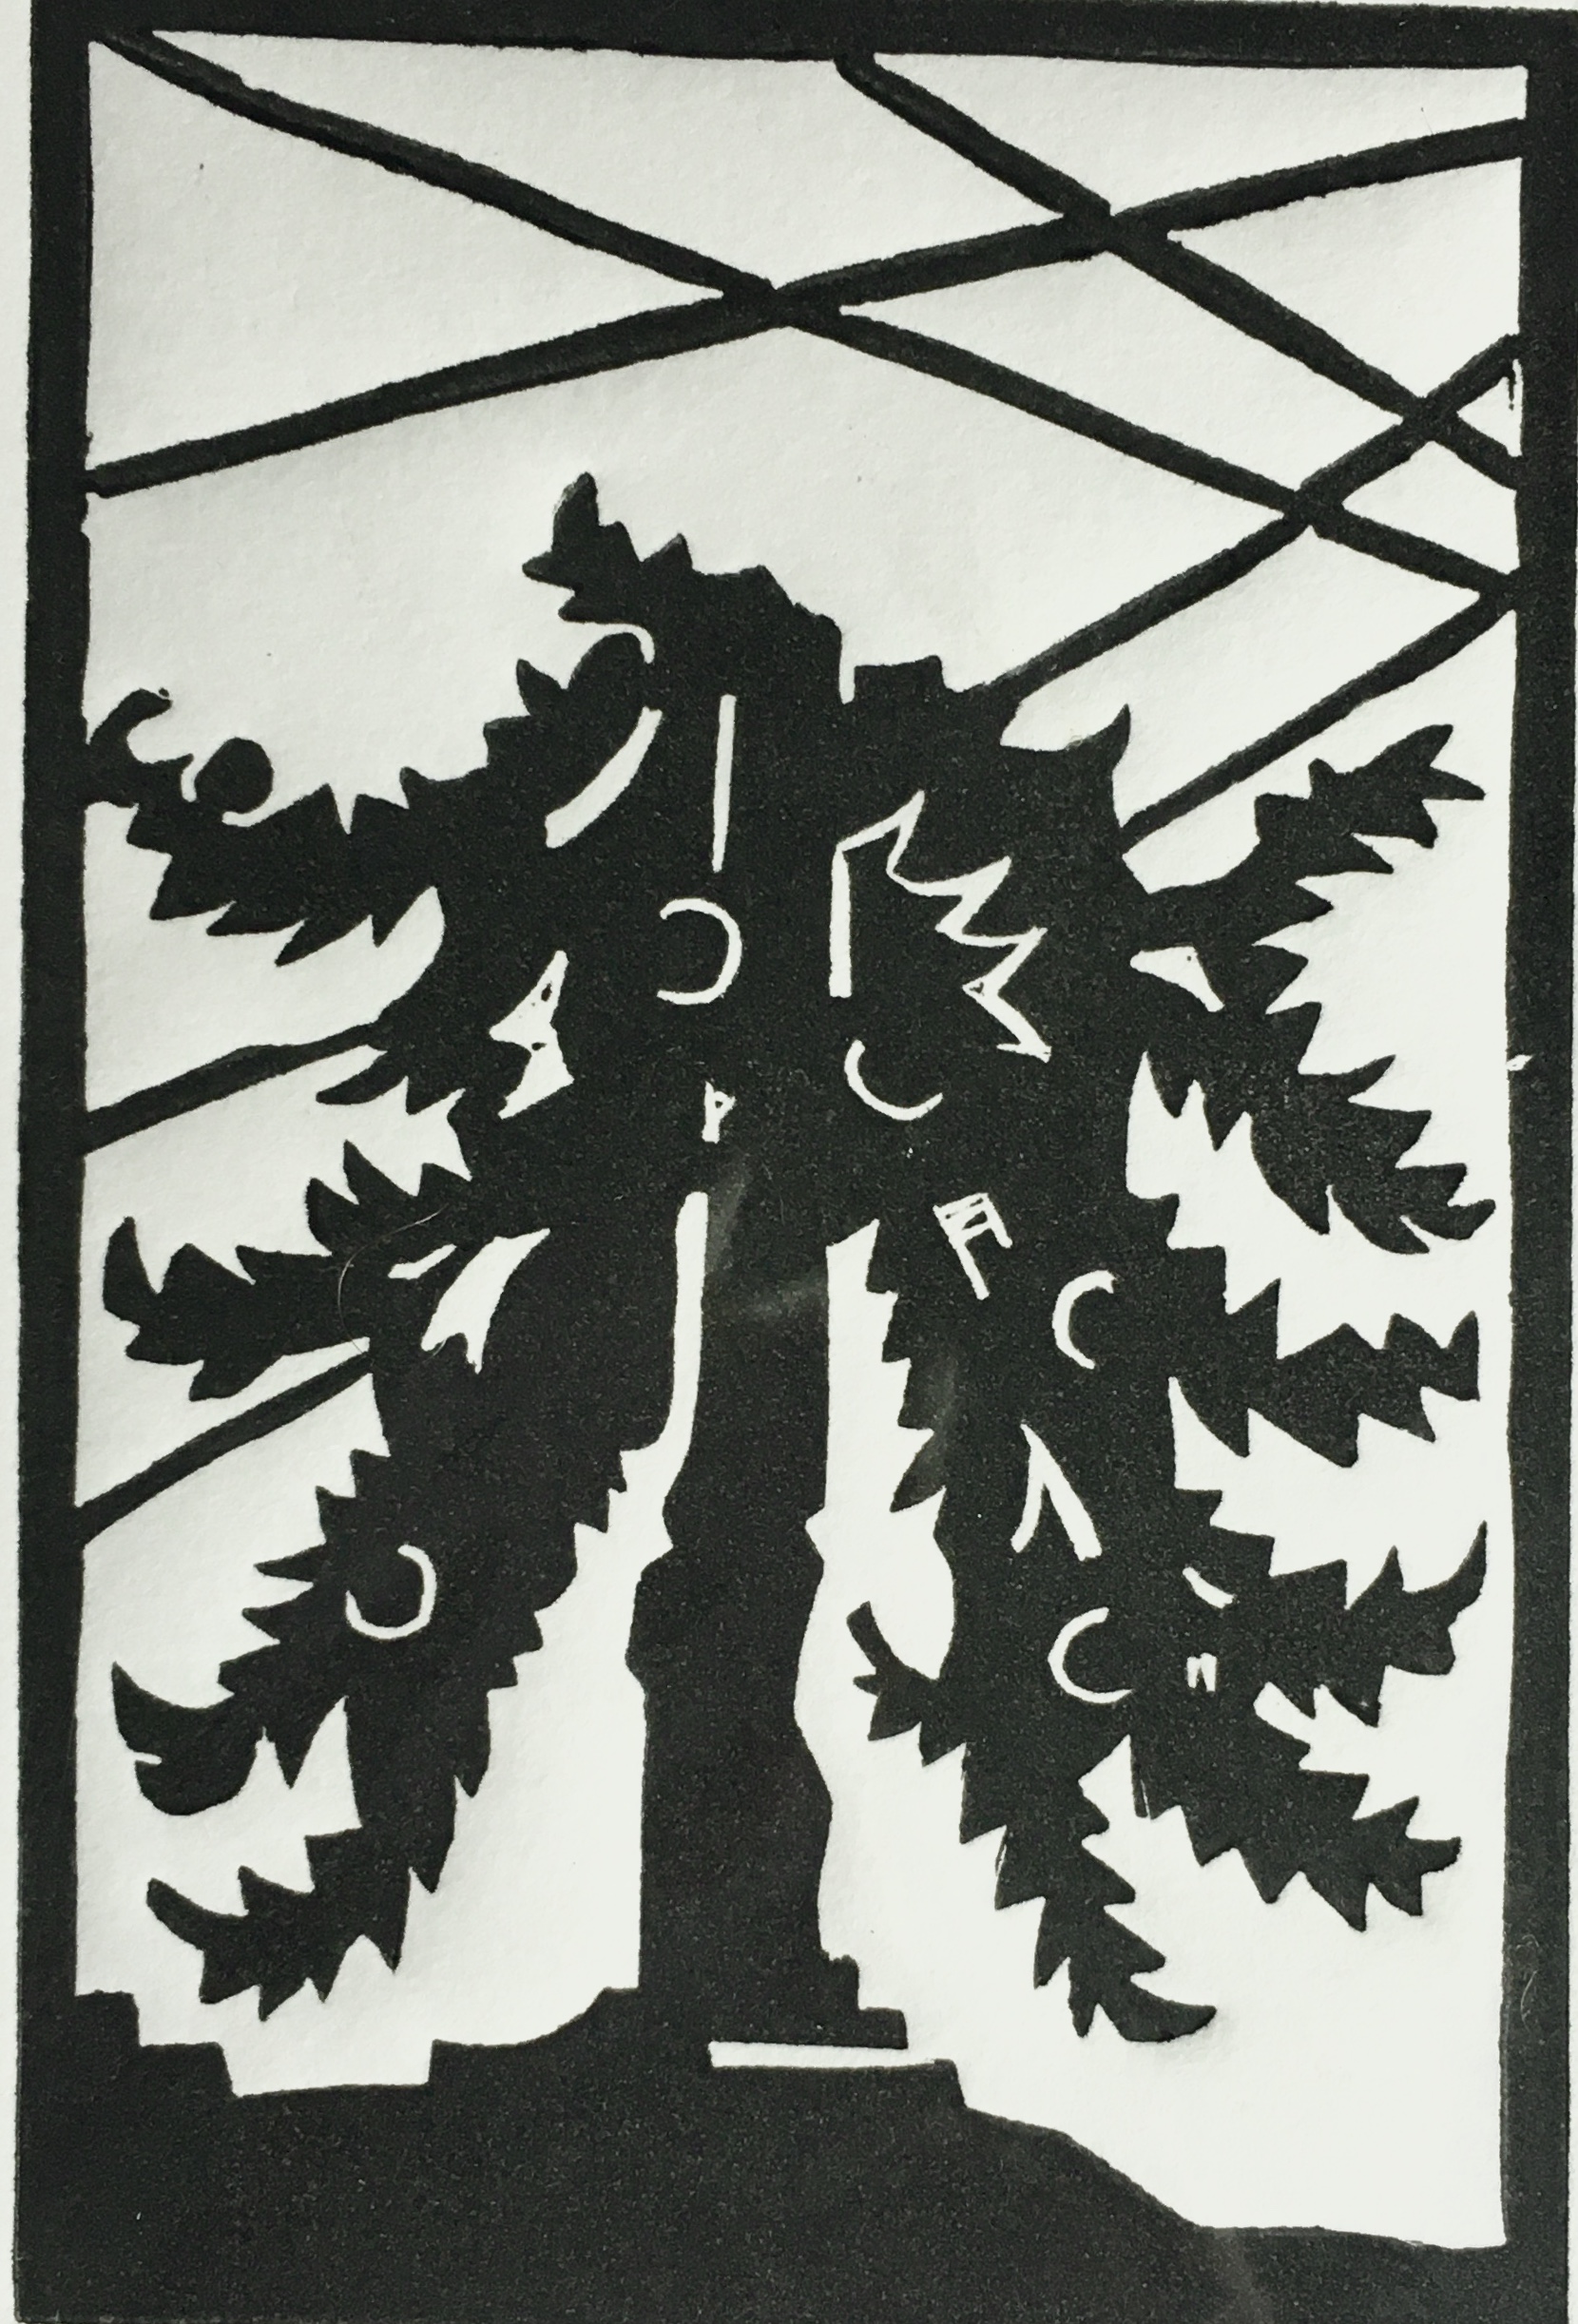 Black and white Linocut depicting a monkey puzzle tree in Seattle, WA